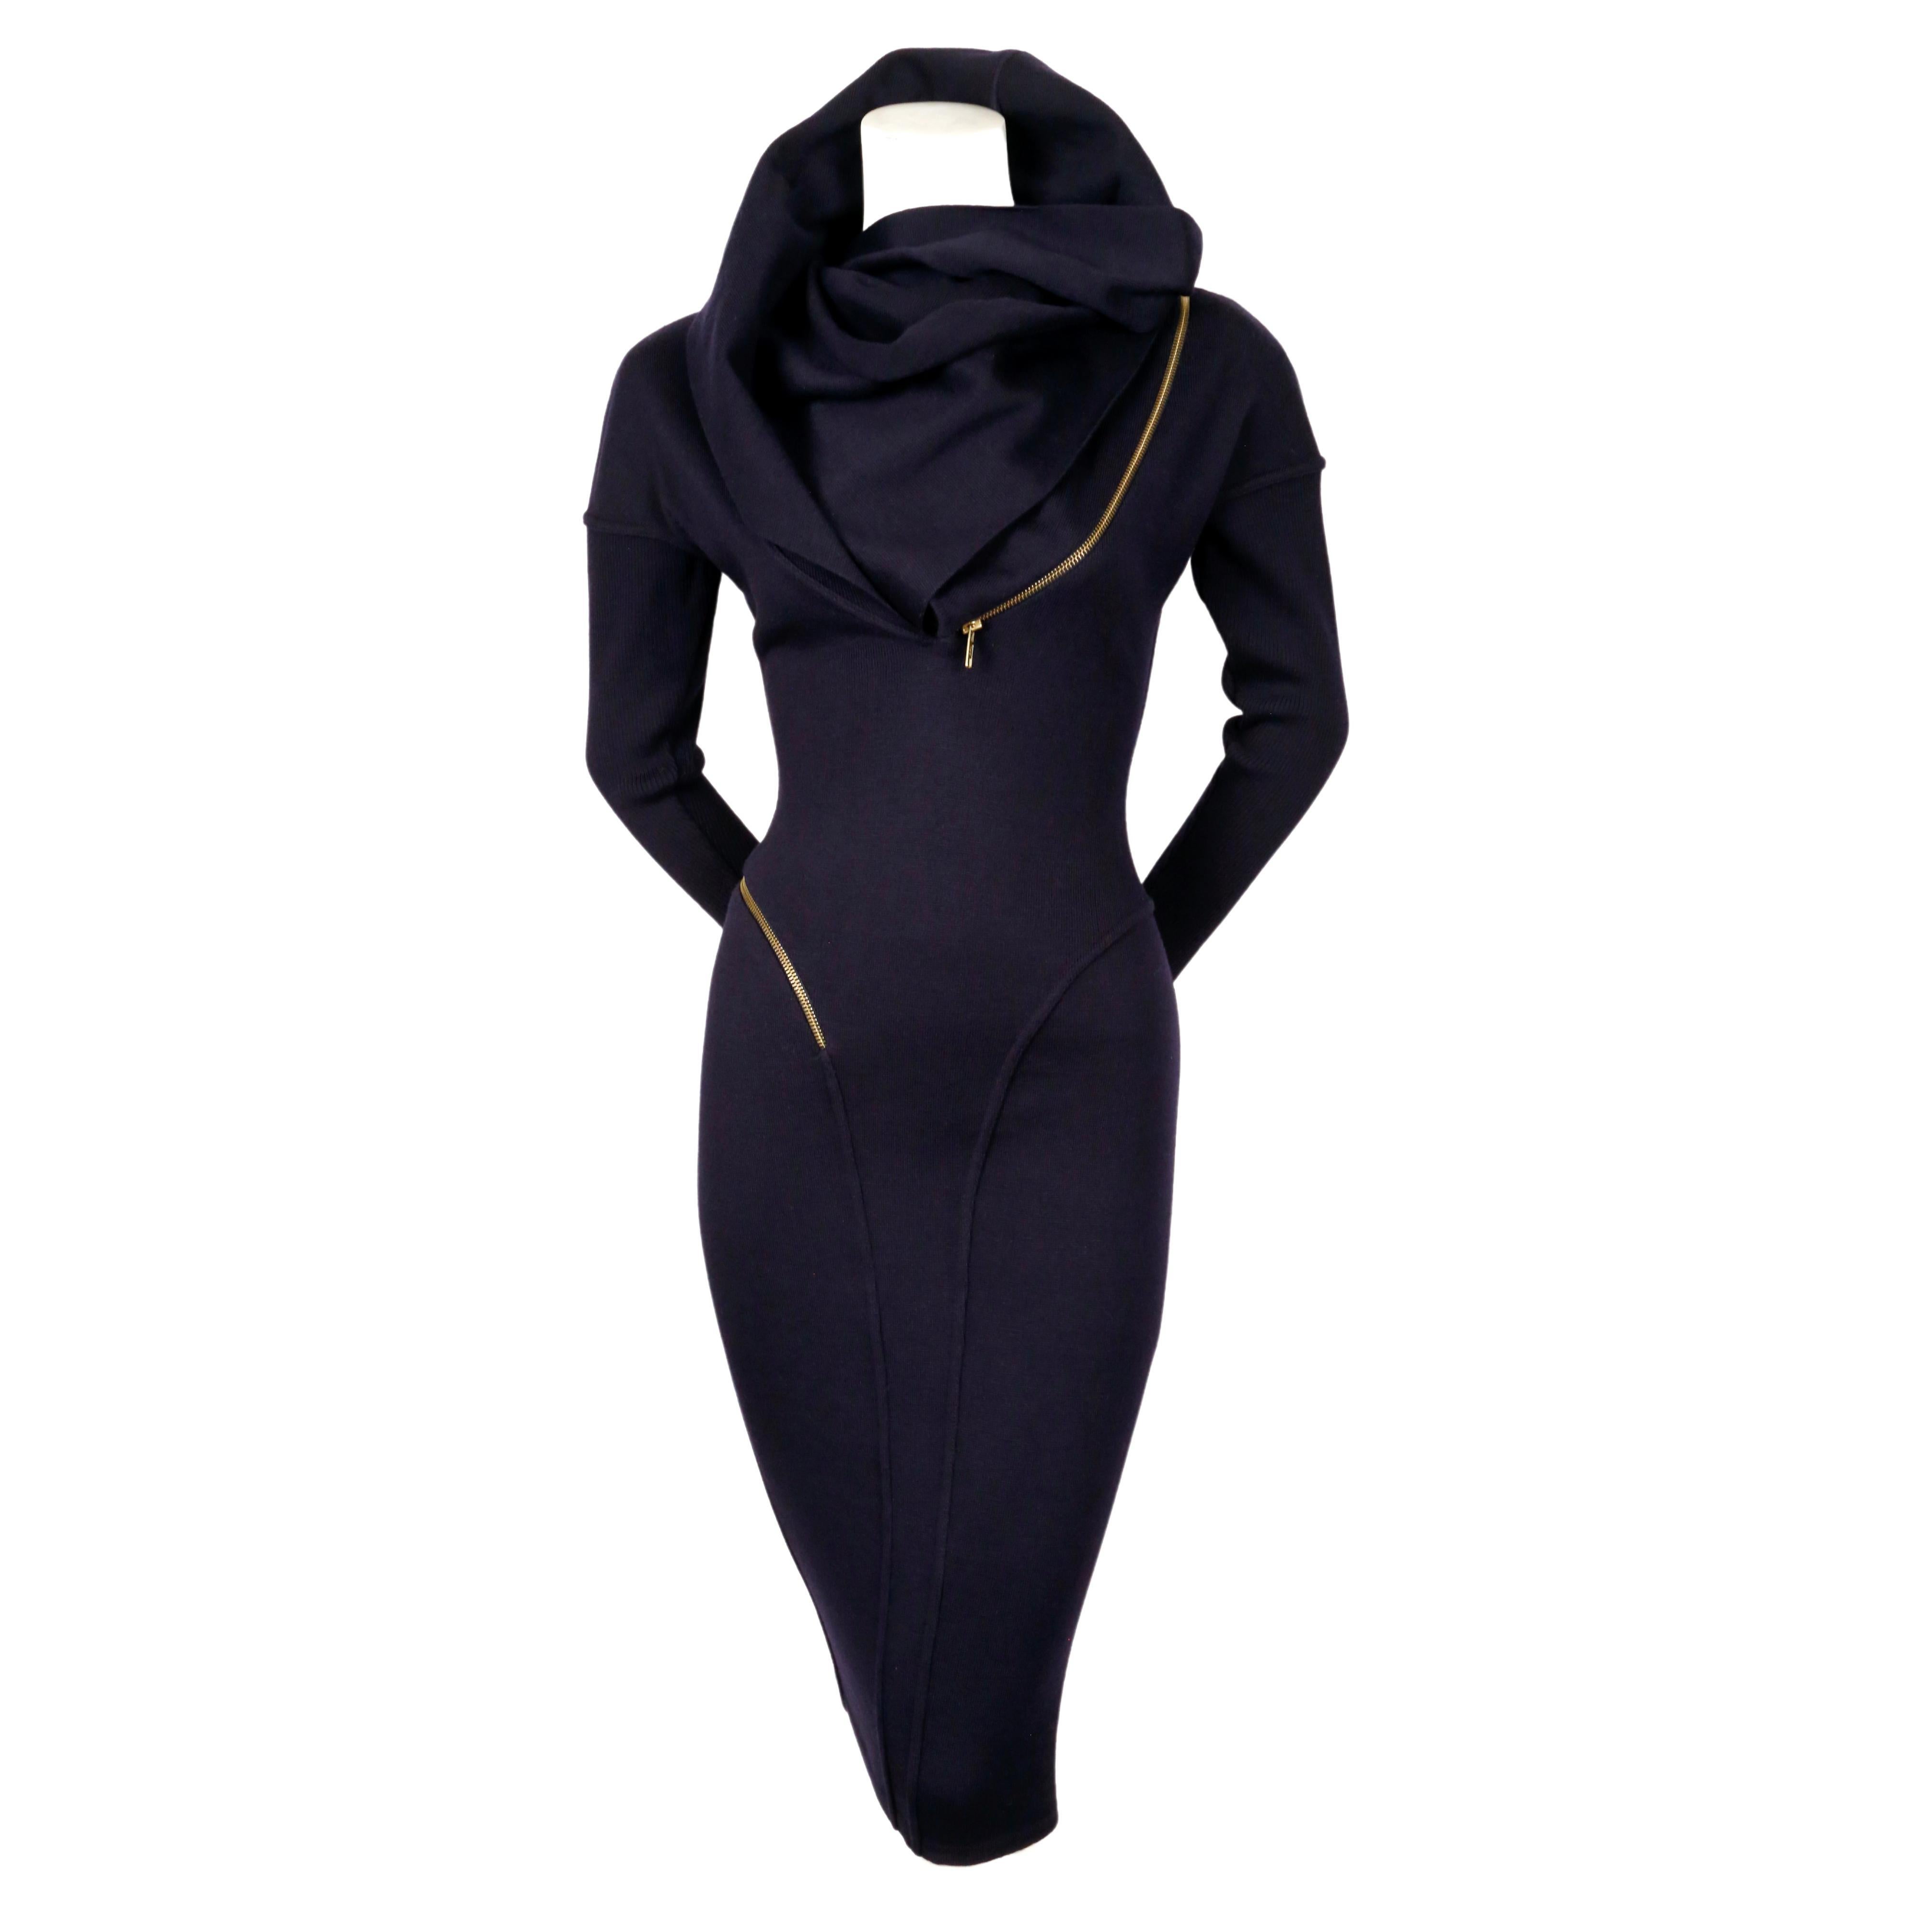 1986 AZZEDINE ALAIA iconic spiral zippered hooded navy blue runway dress